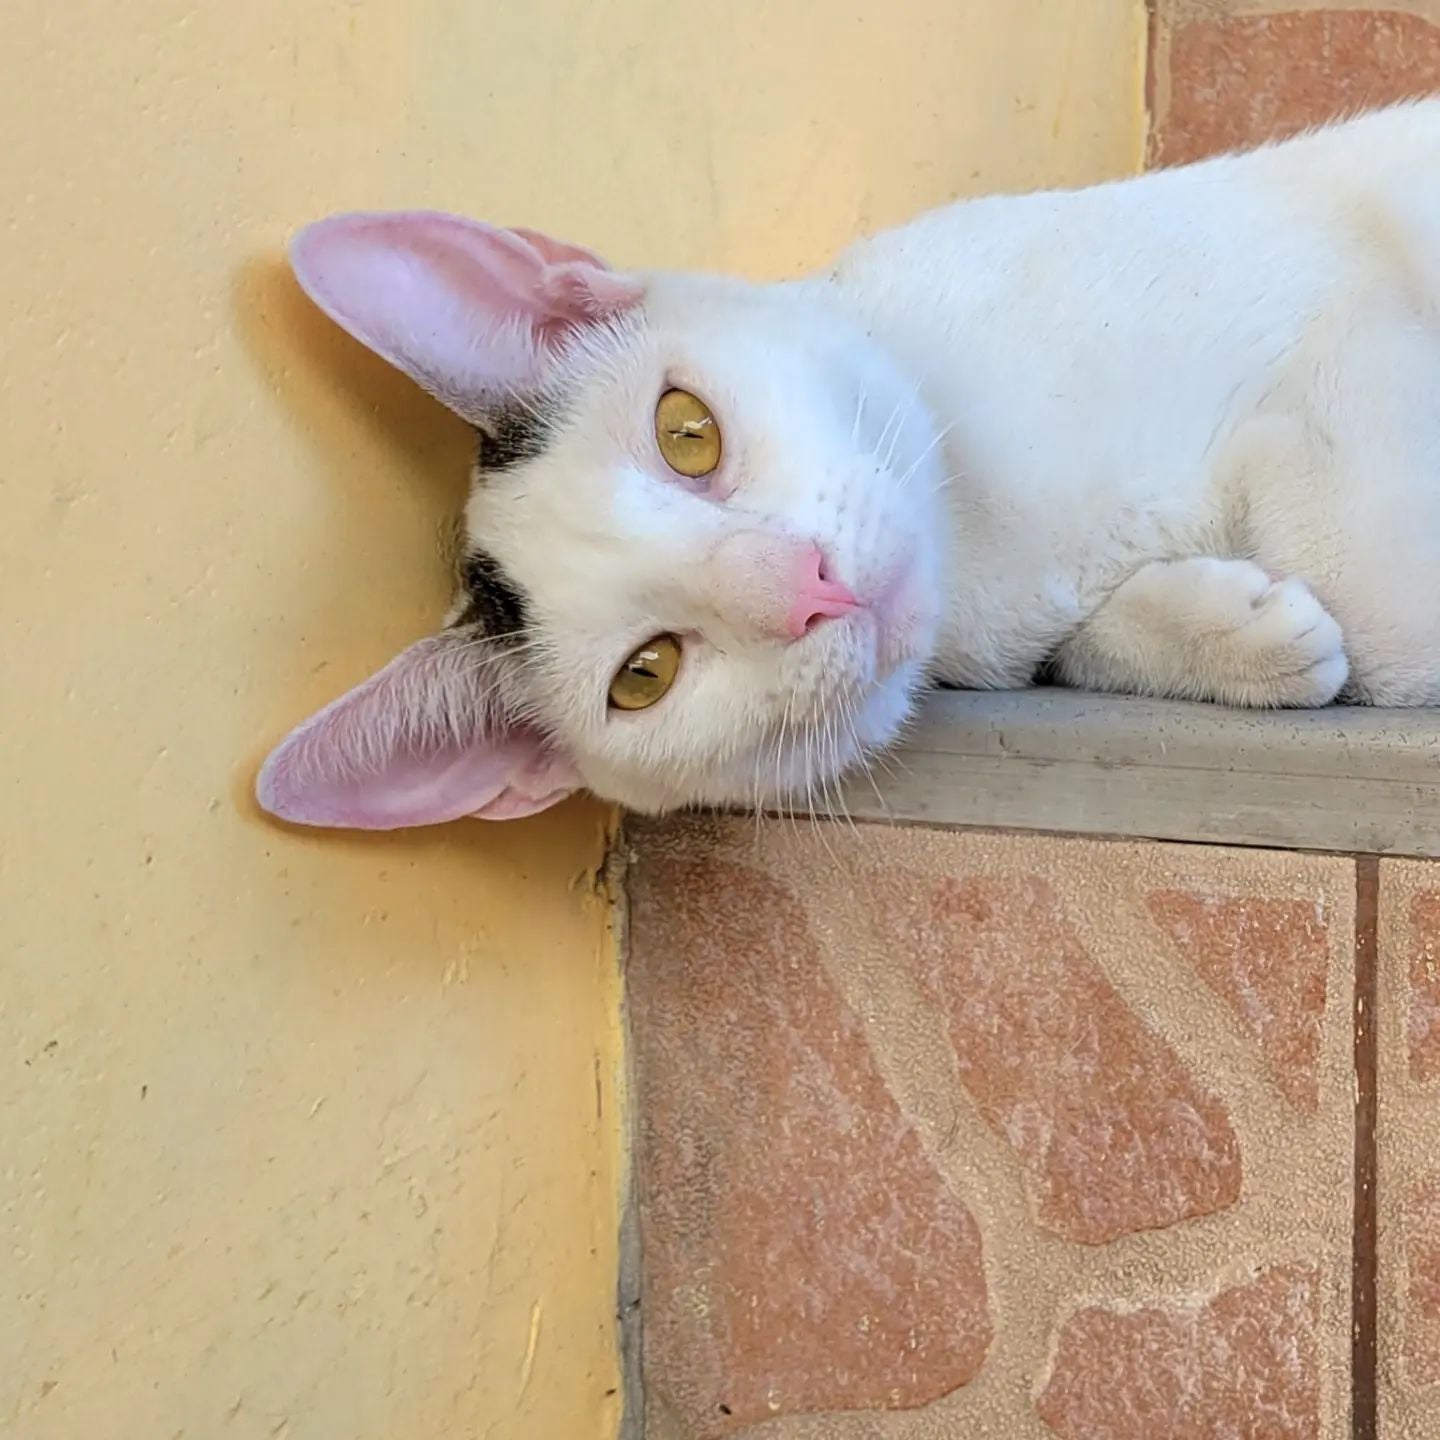 SLOWING DOWN IN IQUITOS WITH CATS